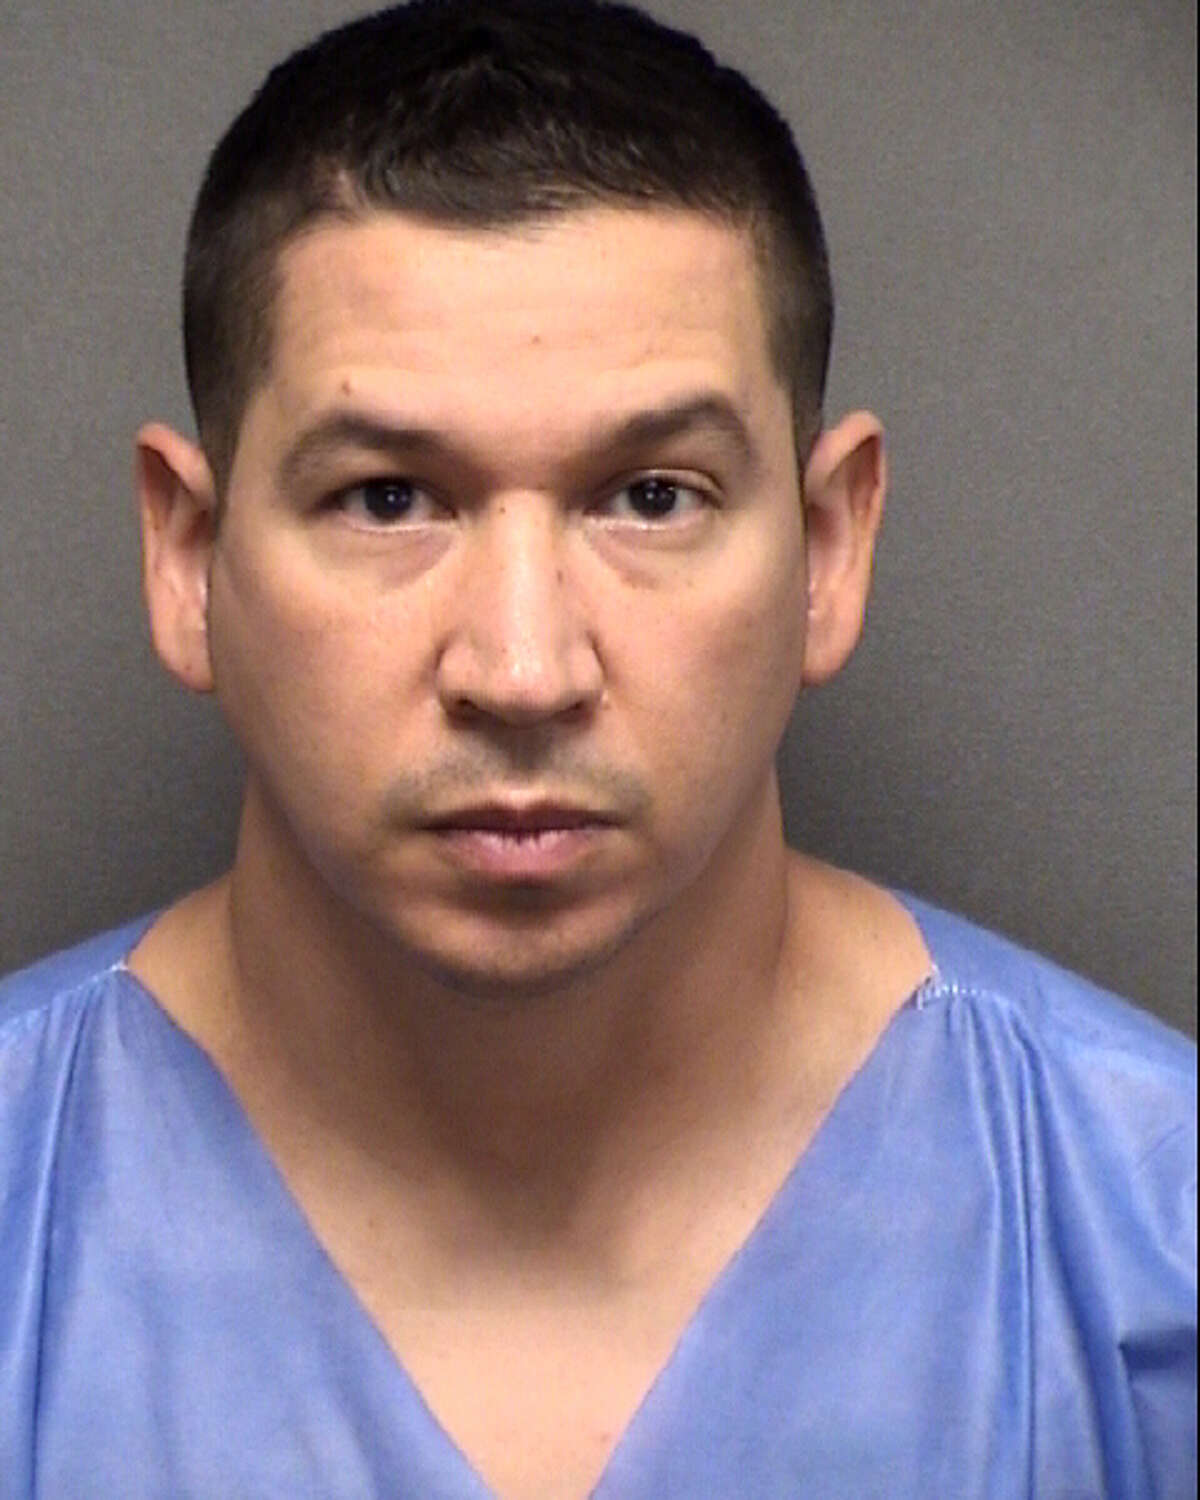 Sergio Ricardo Rodriguez Jr., a 40-year-old nurse practitioner in San Antonio, is accused of sexually assaulting a patient.